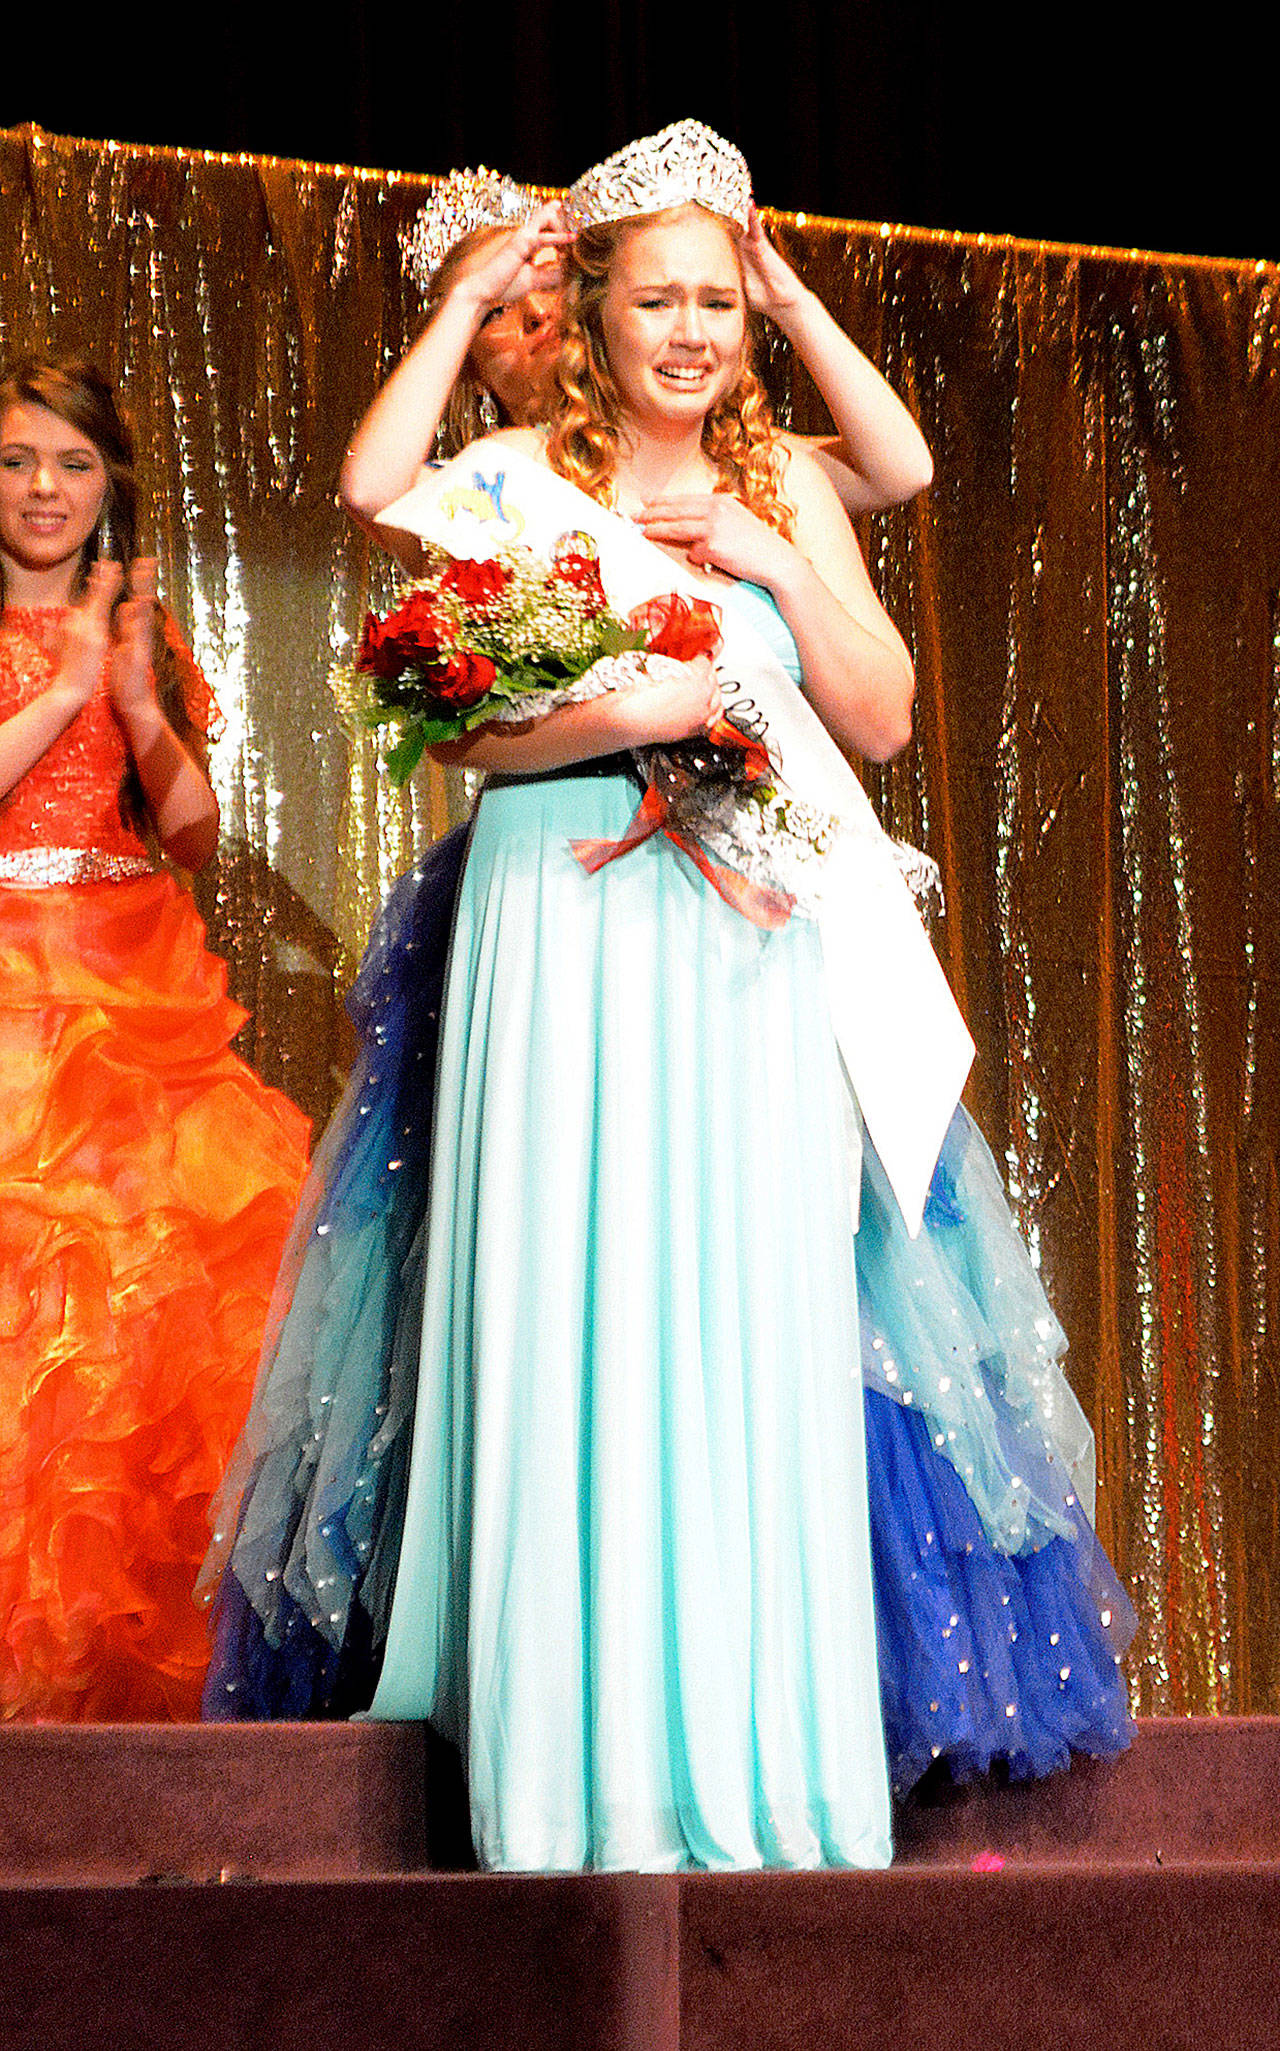 Alainna Widdifield was crowned Fathoms O’ Fun queen in March at the annual scholarship program pageant.                                (File photo)                                Alainna Widdifield was crowned Fathoms O’ Fun queen in March at the annual scholarship program pageant. (Kitsap Daily News file photo)